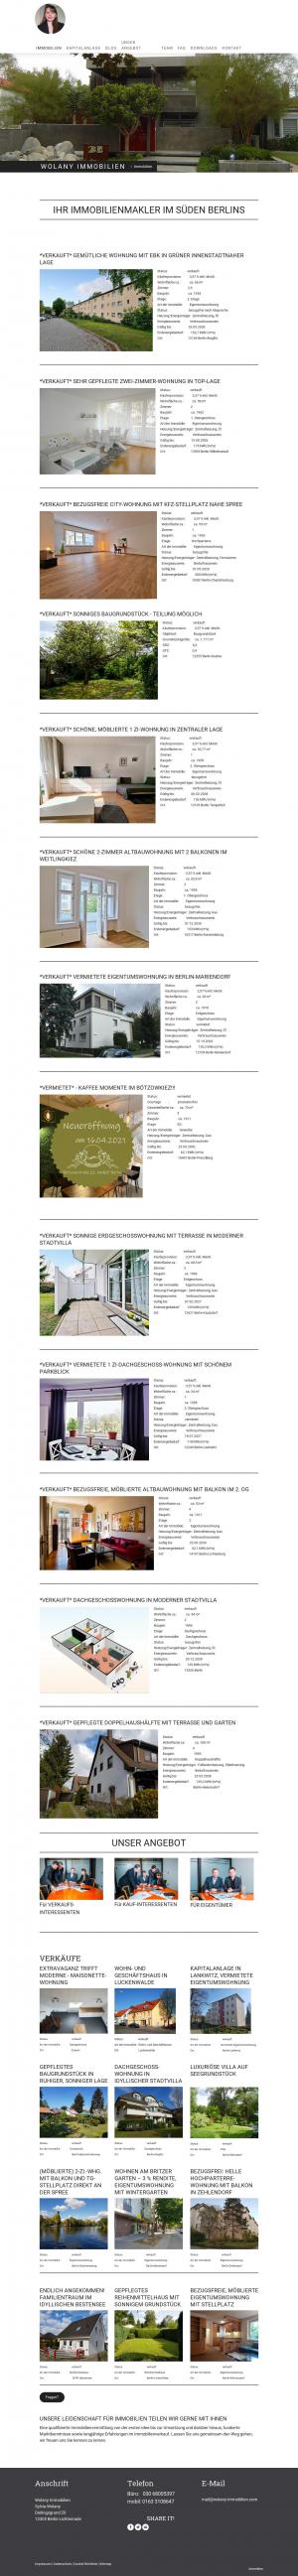 www.wolany-immobilien.com